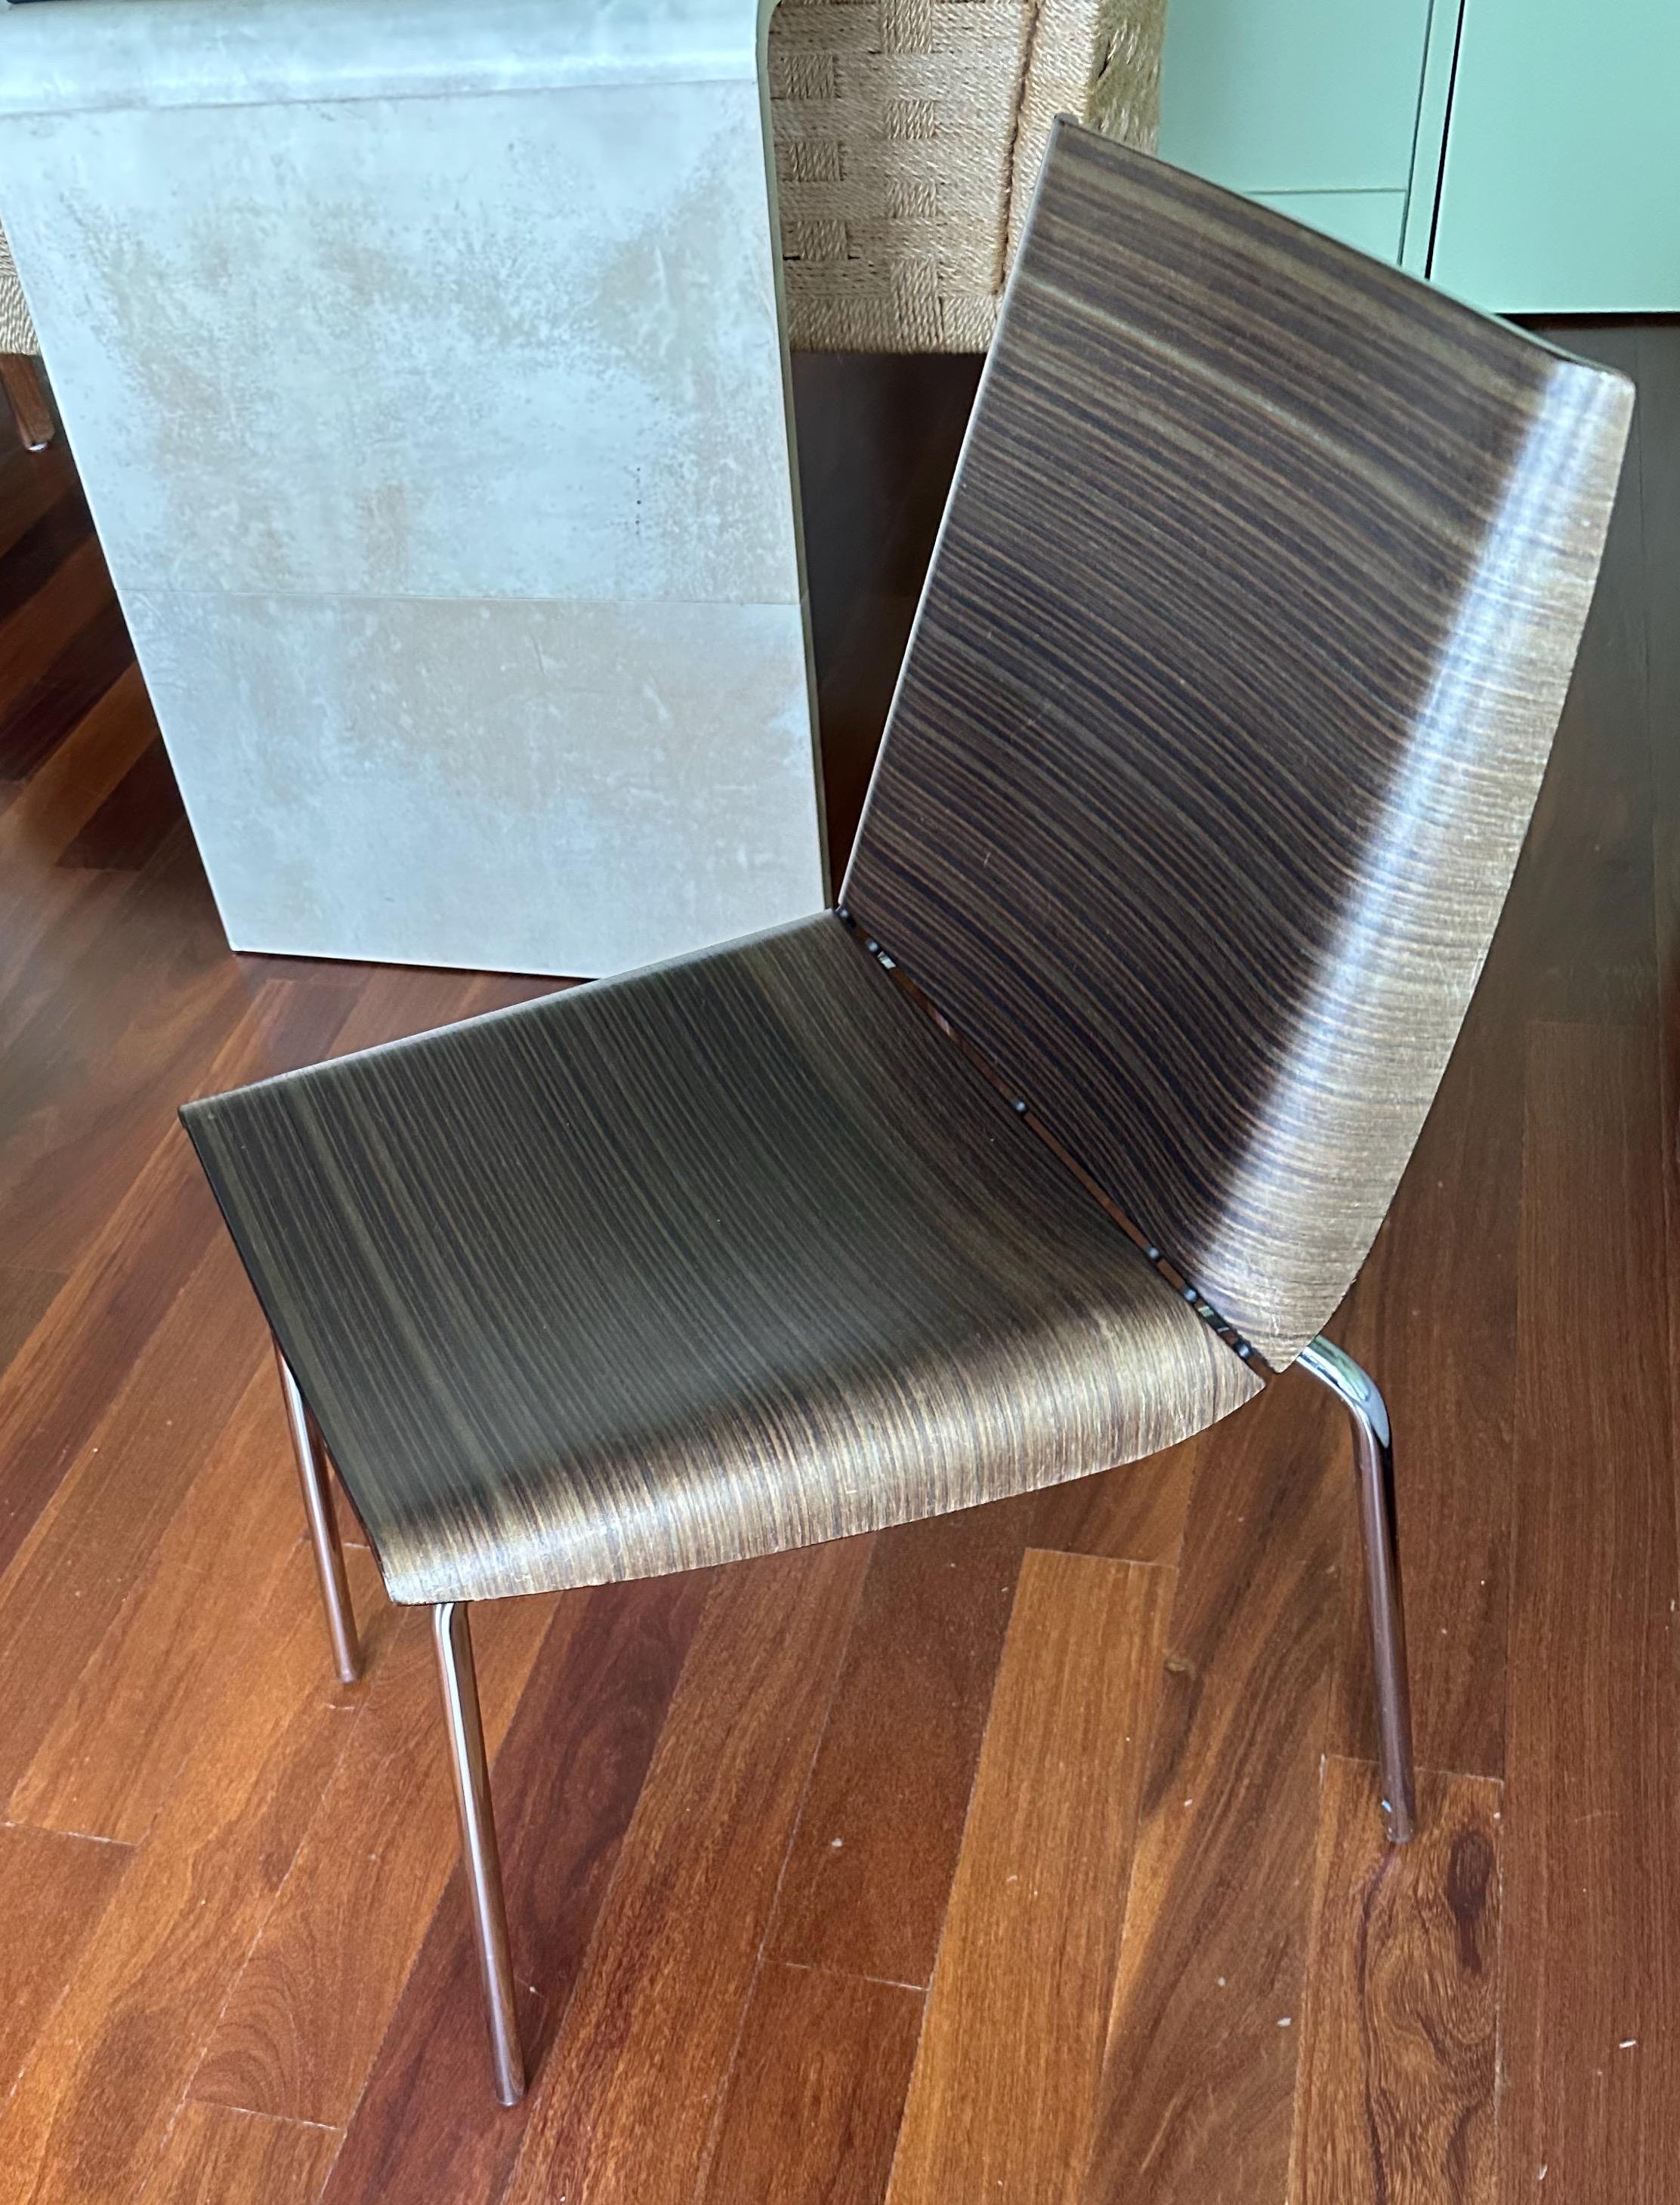 This set of six modernist bent plywood chairs with chrome tubular legs were designed by Biagio Cisotti, Sandra Laube for Italian firm Plank have zebra wood design in the wood. Etched 